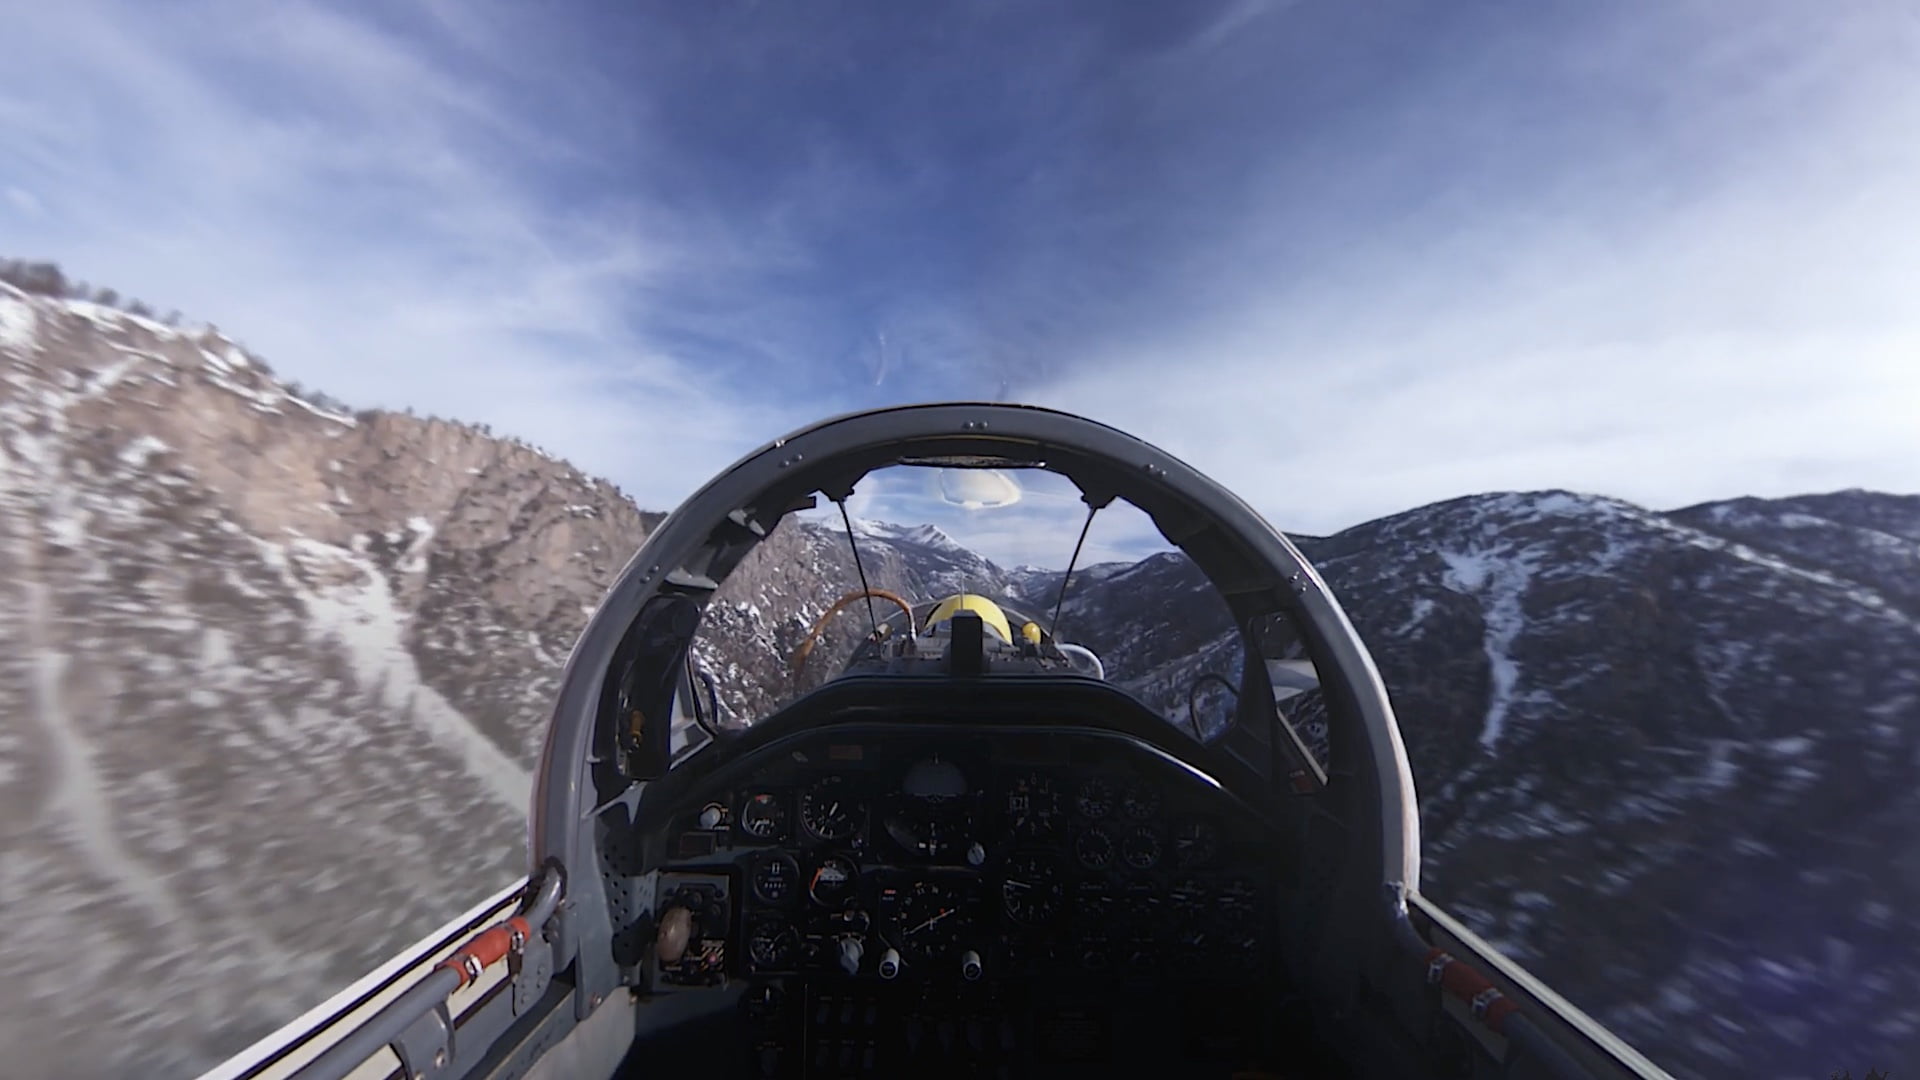 Supersonic flight in VR: New Quest movie puts you in the cockpit